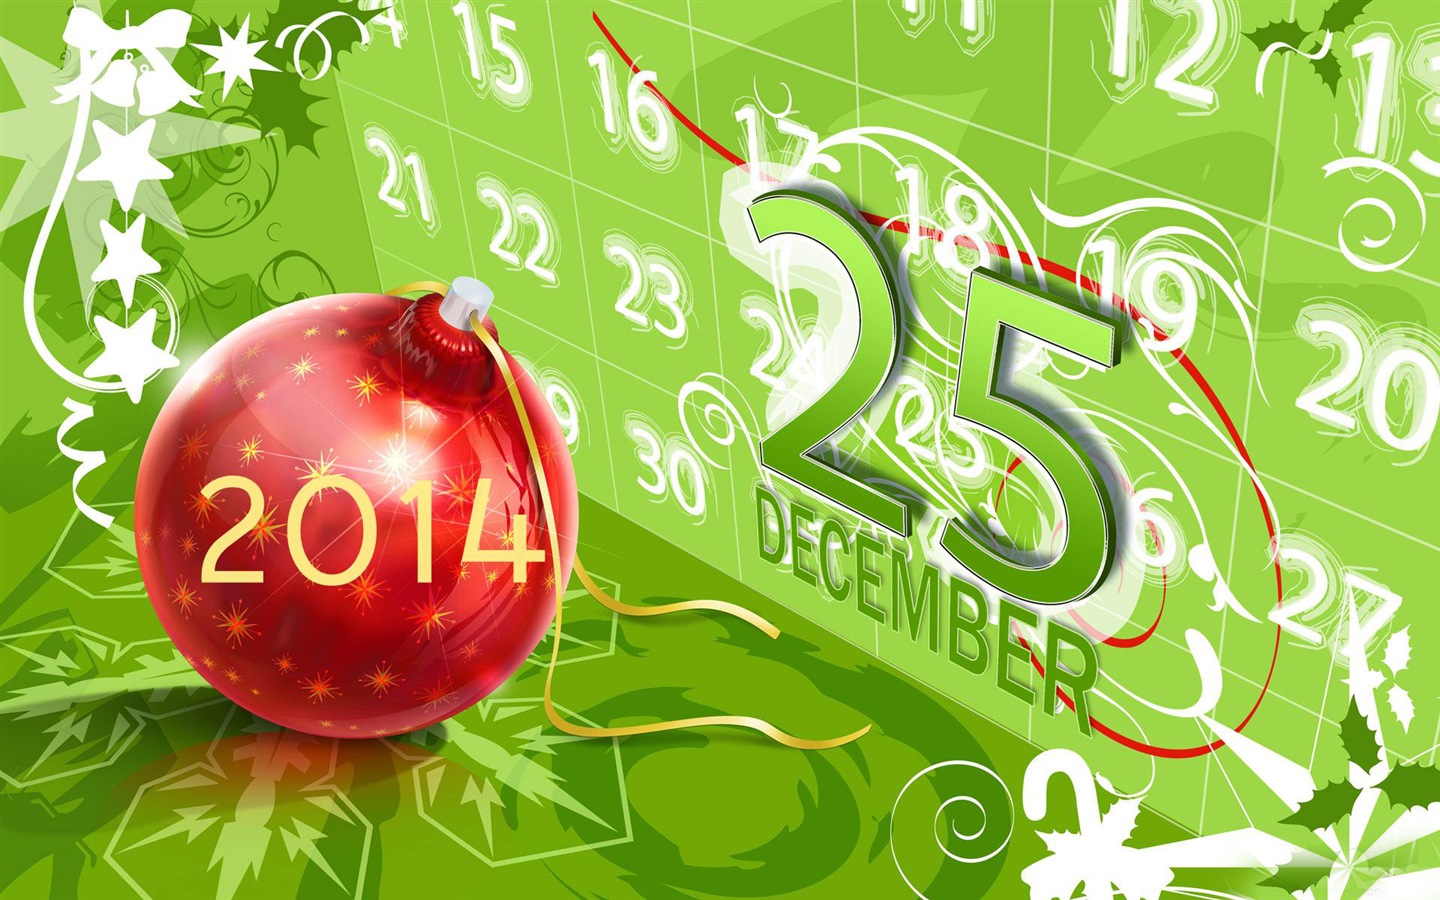 2014 New Year Theme HD Wallpapers (1) #6 - 1440x900